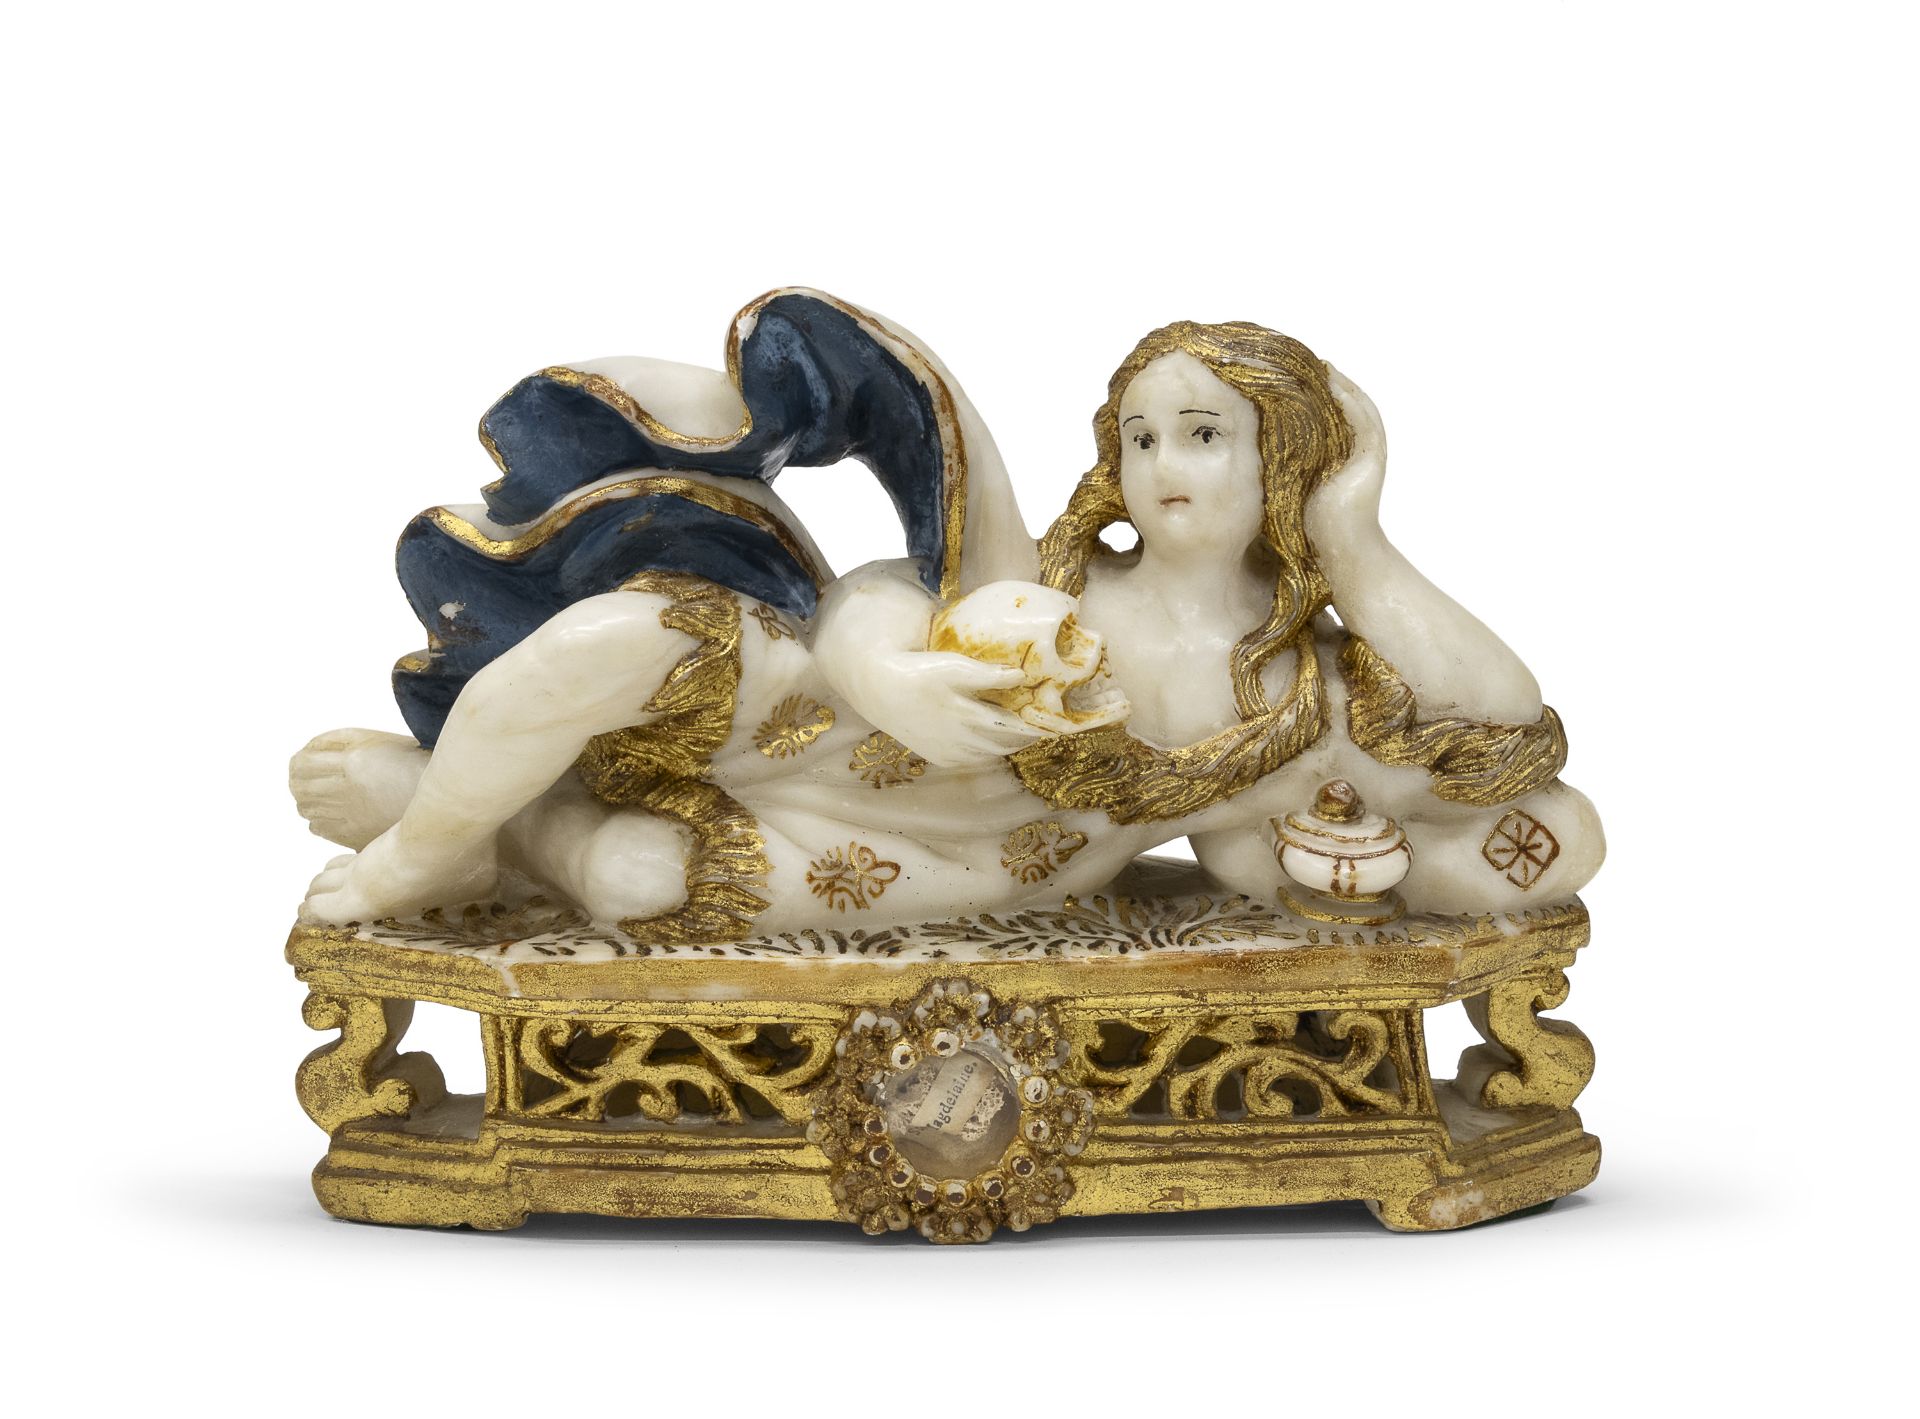 ALABASTER RELIQUARY SCULPTURE PROBABLY 17TH CENTURY ROME